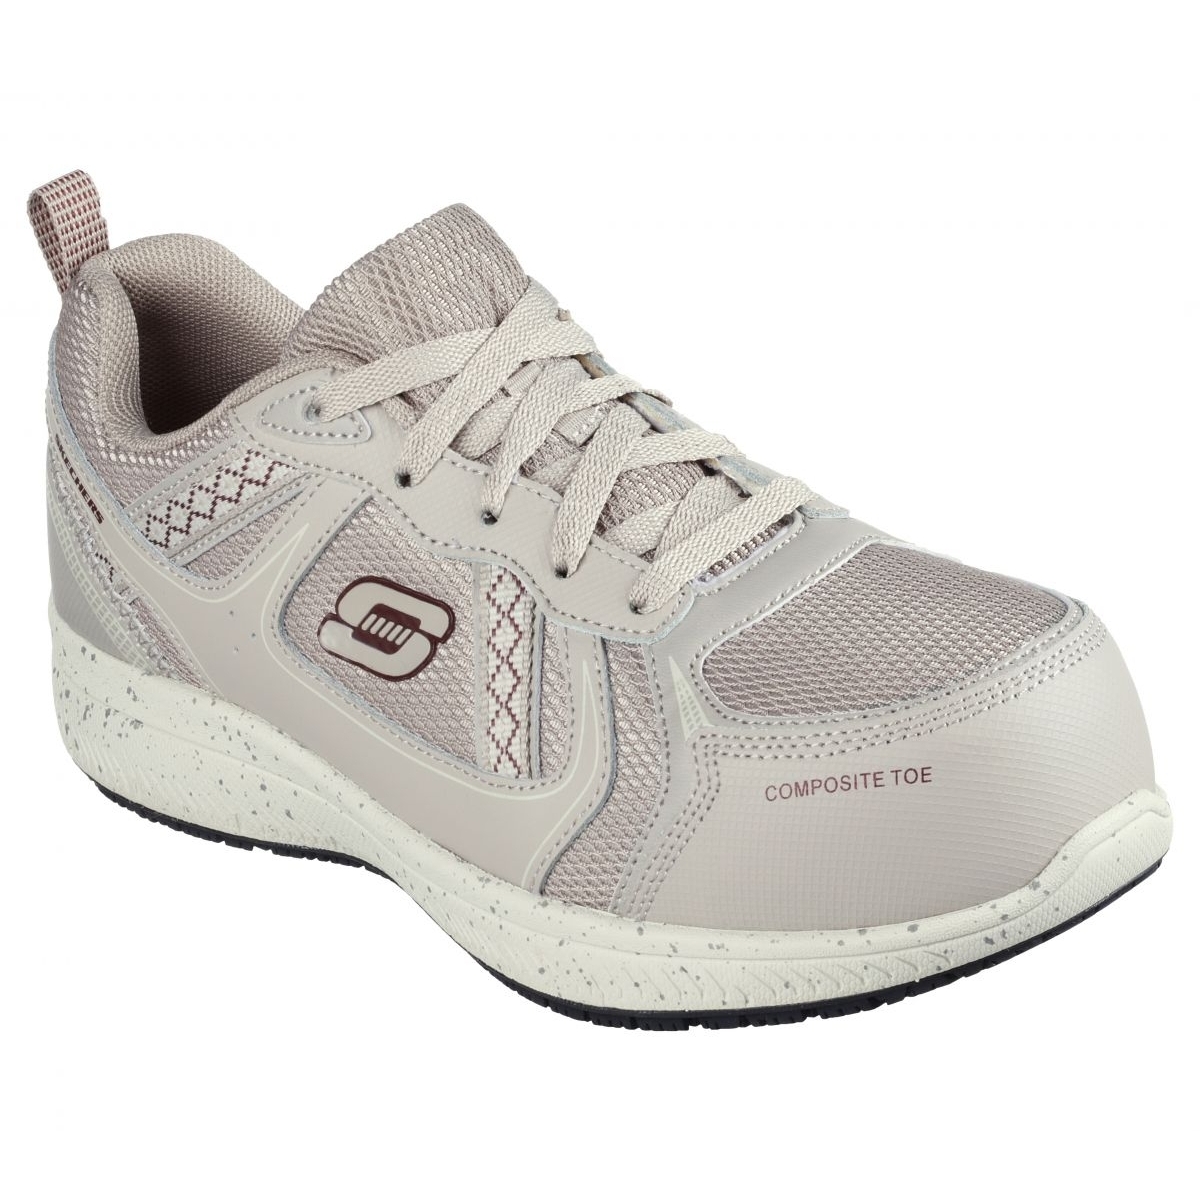 Skechers ELG-5 - Composite Toe TAUPE - TAUPE, 9.5